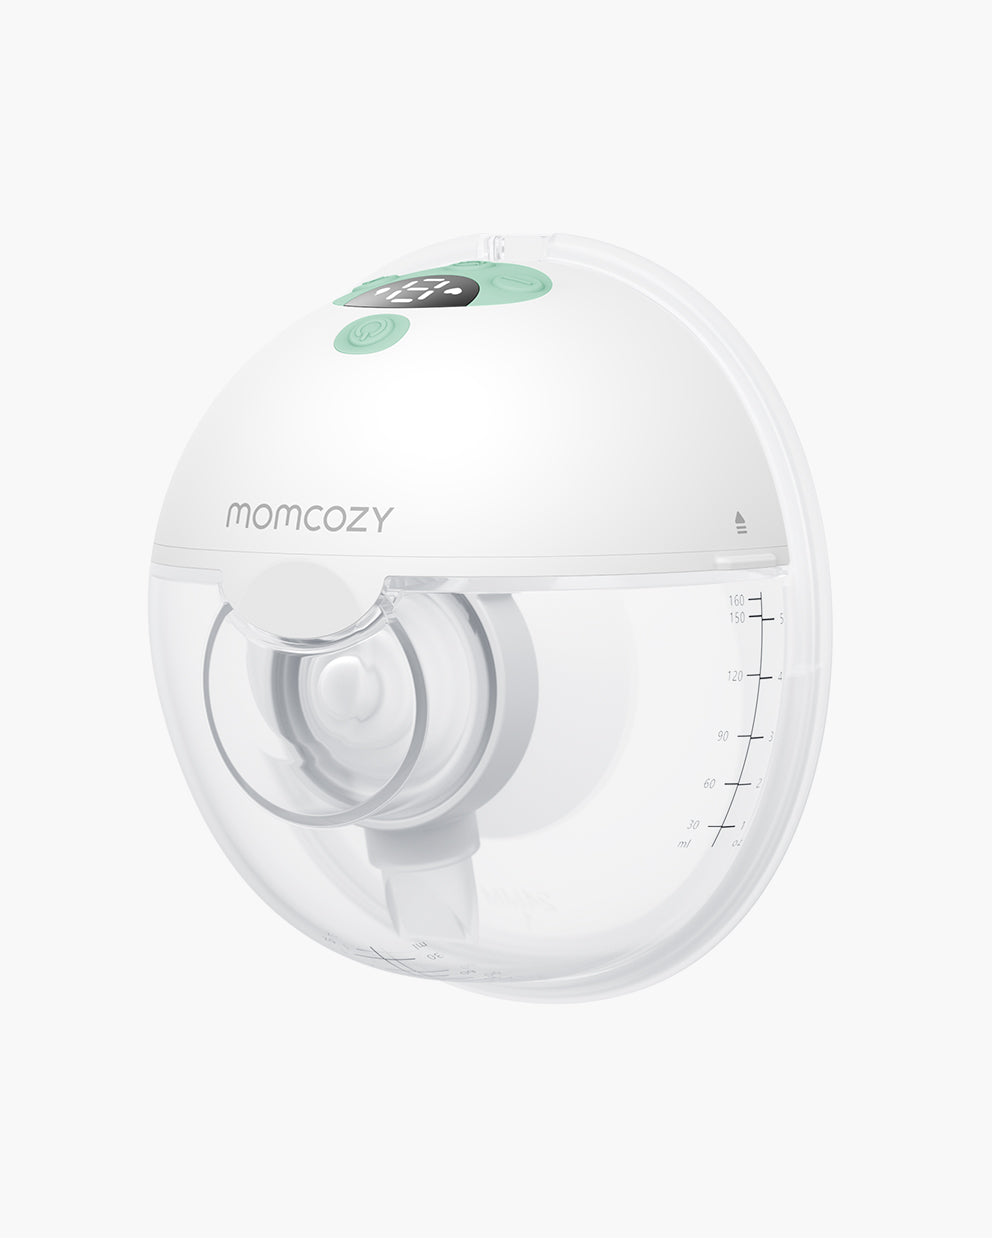 An Honest Review of the Momcozy M5 Wearable Breast Pump